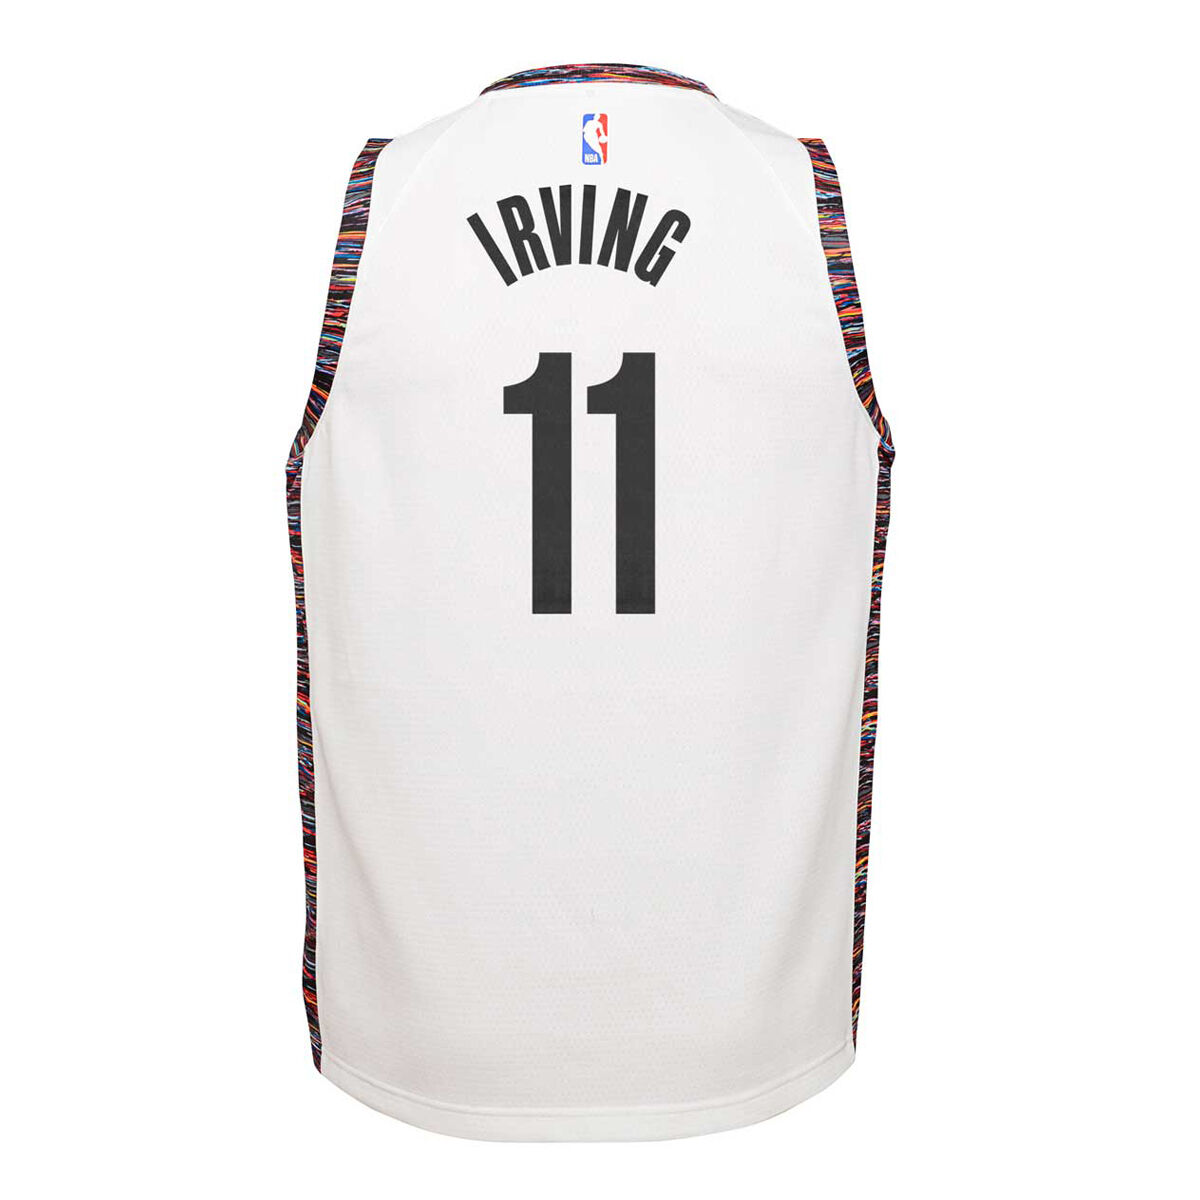 kyrie irving youth large jersey